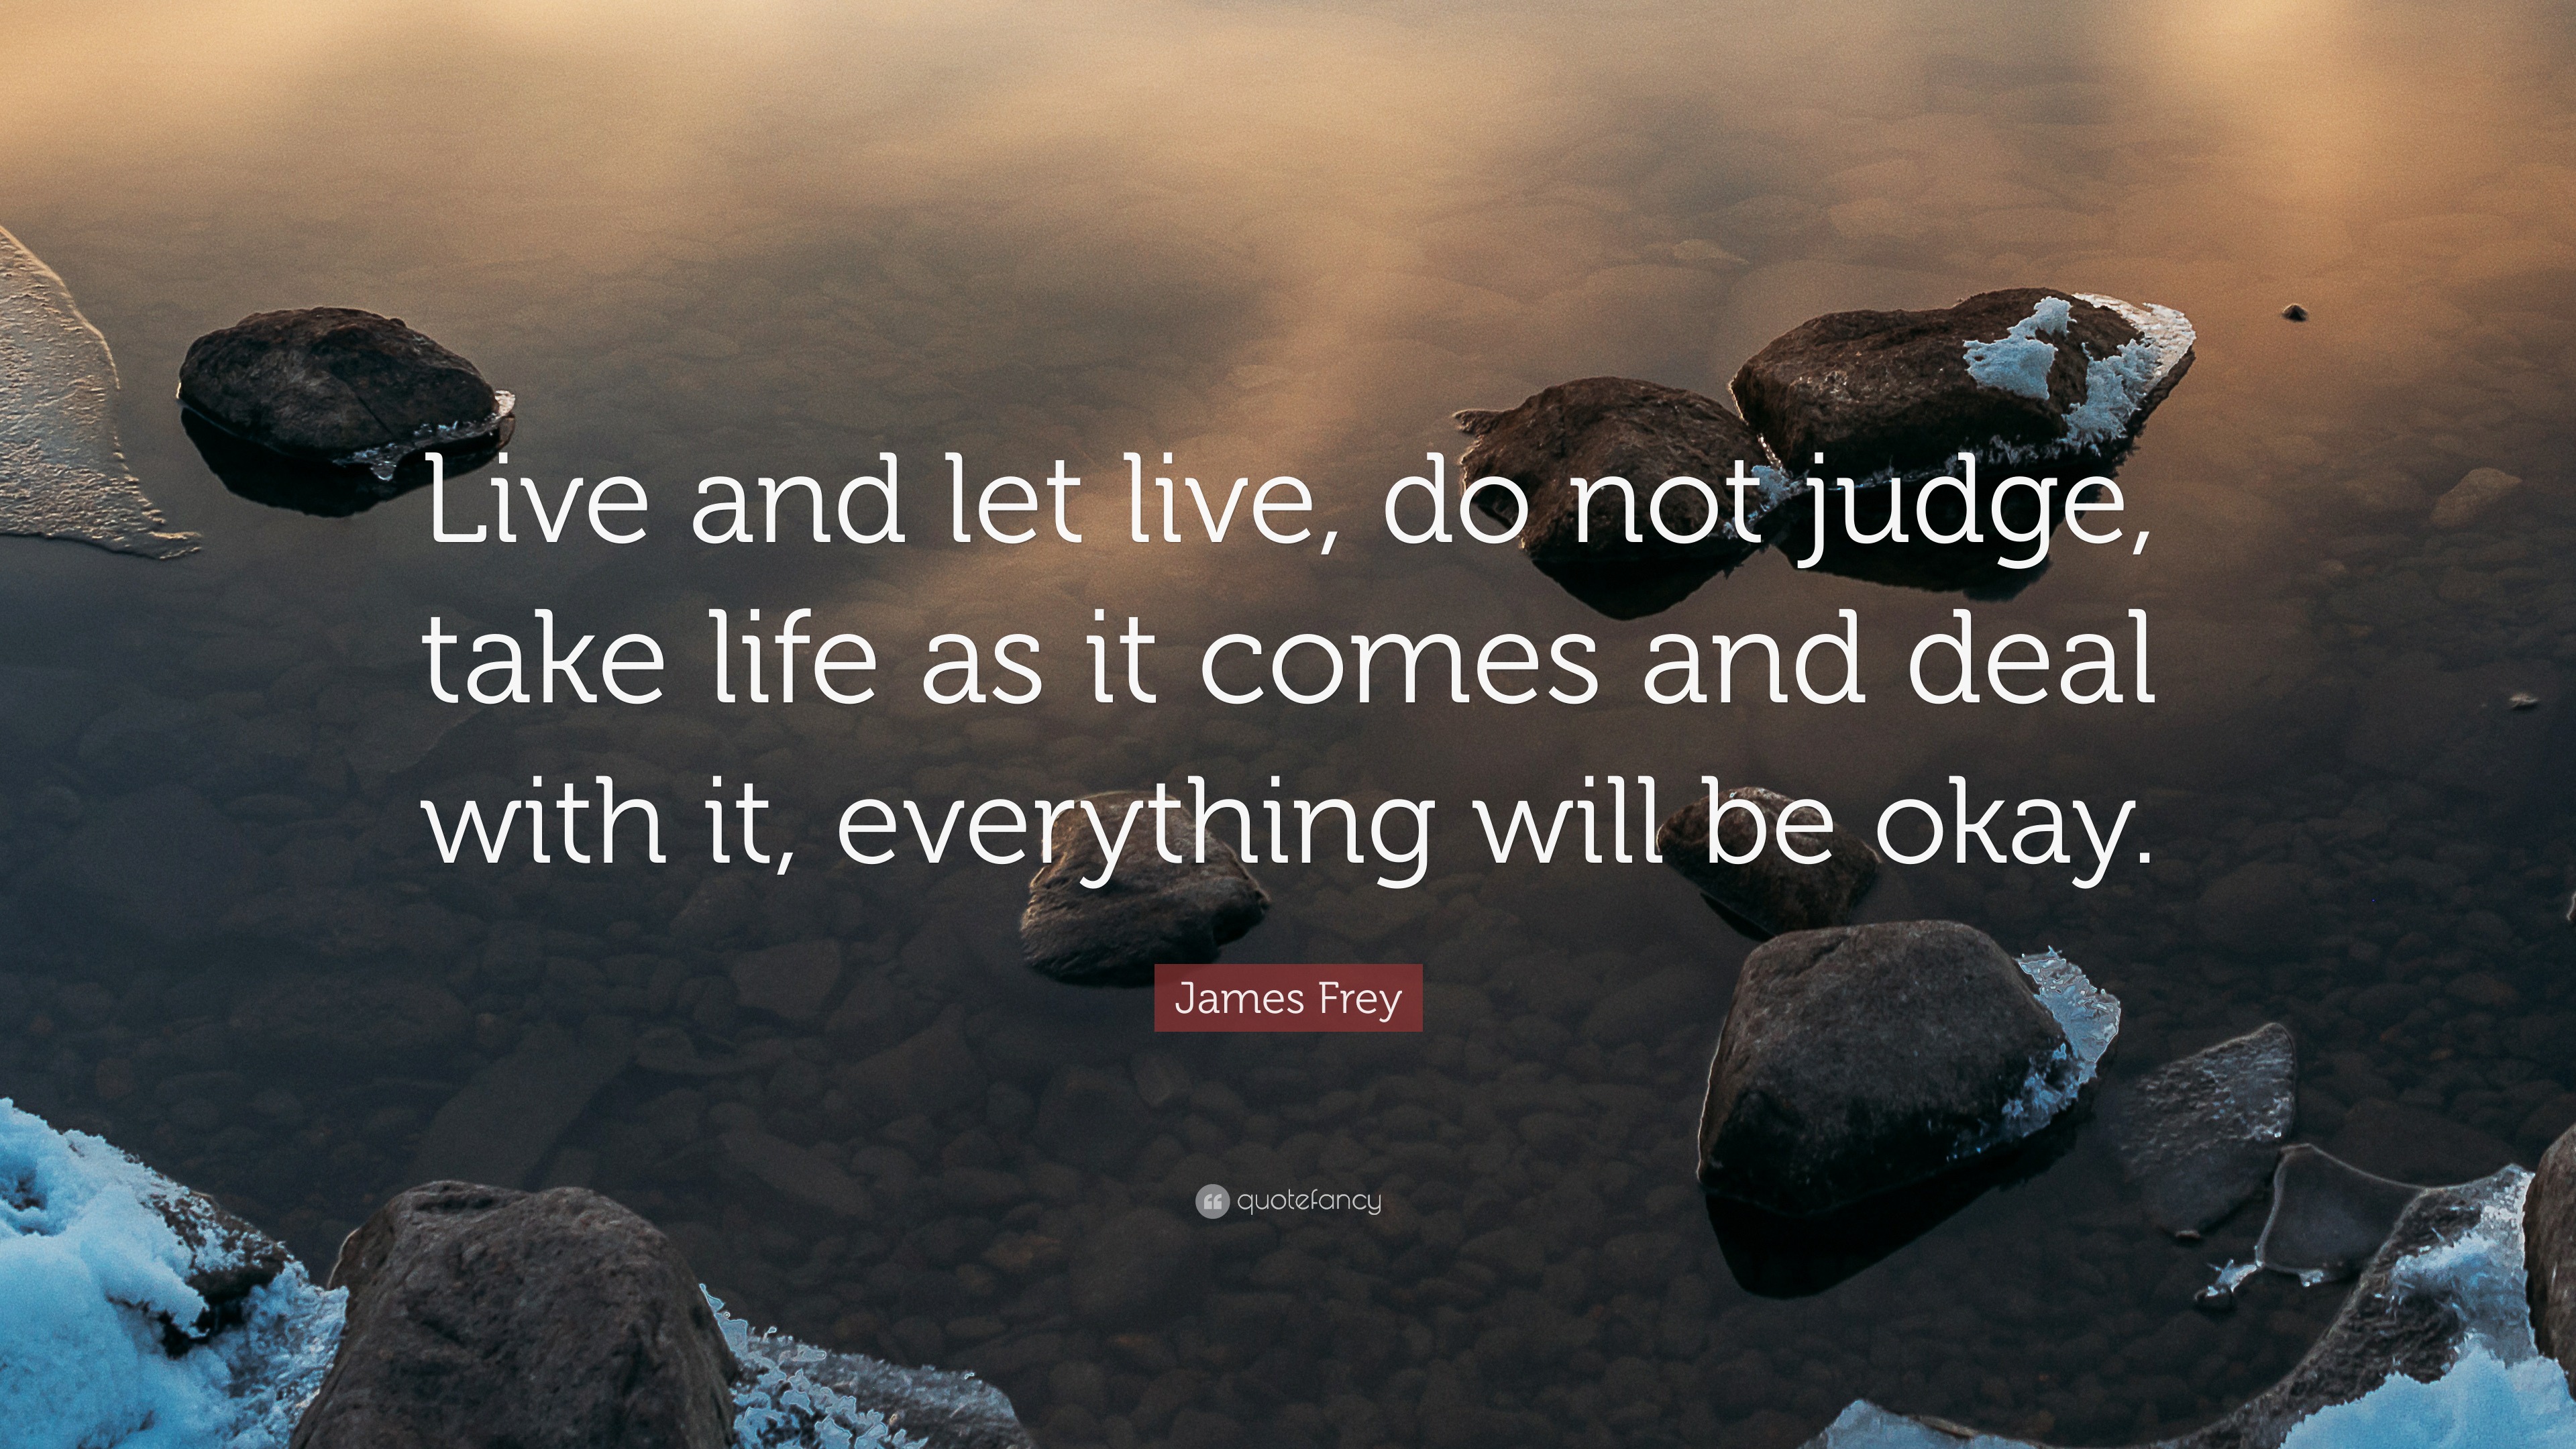 James Frey Quote “Live and let live do not judge take life